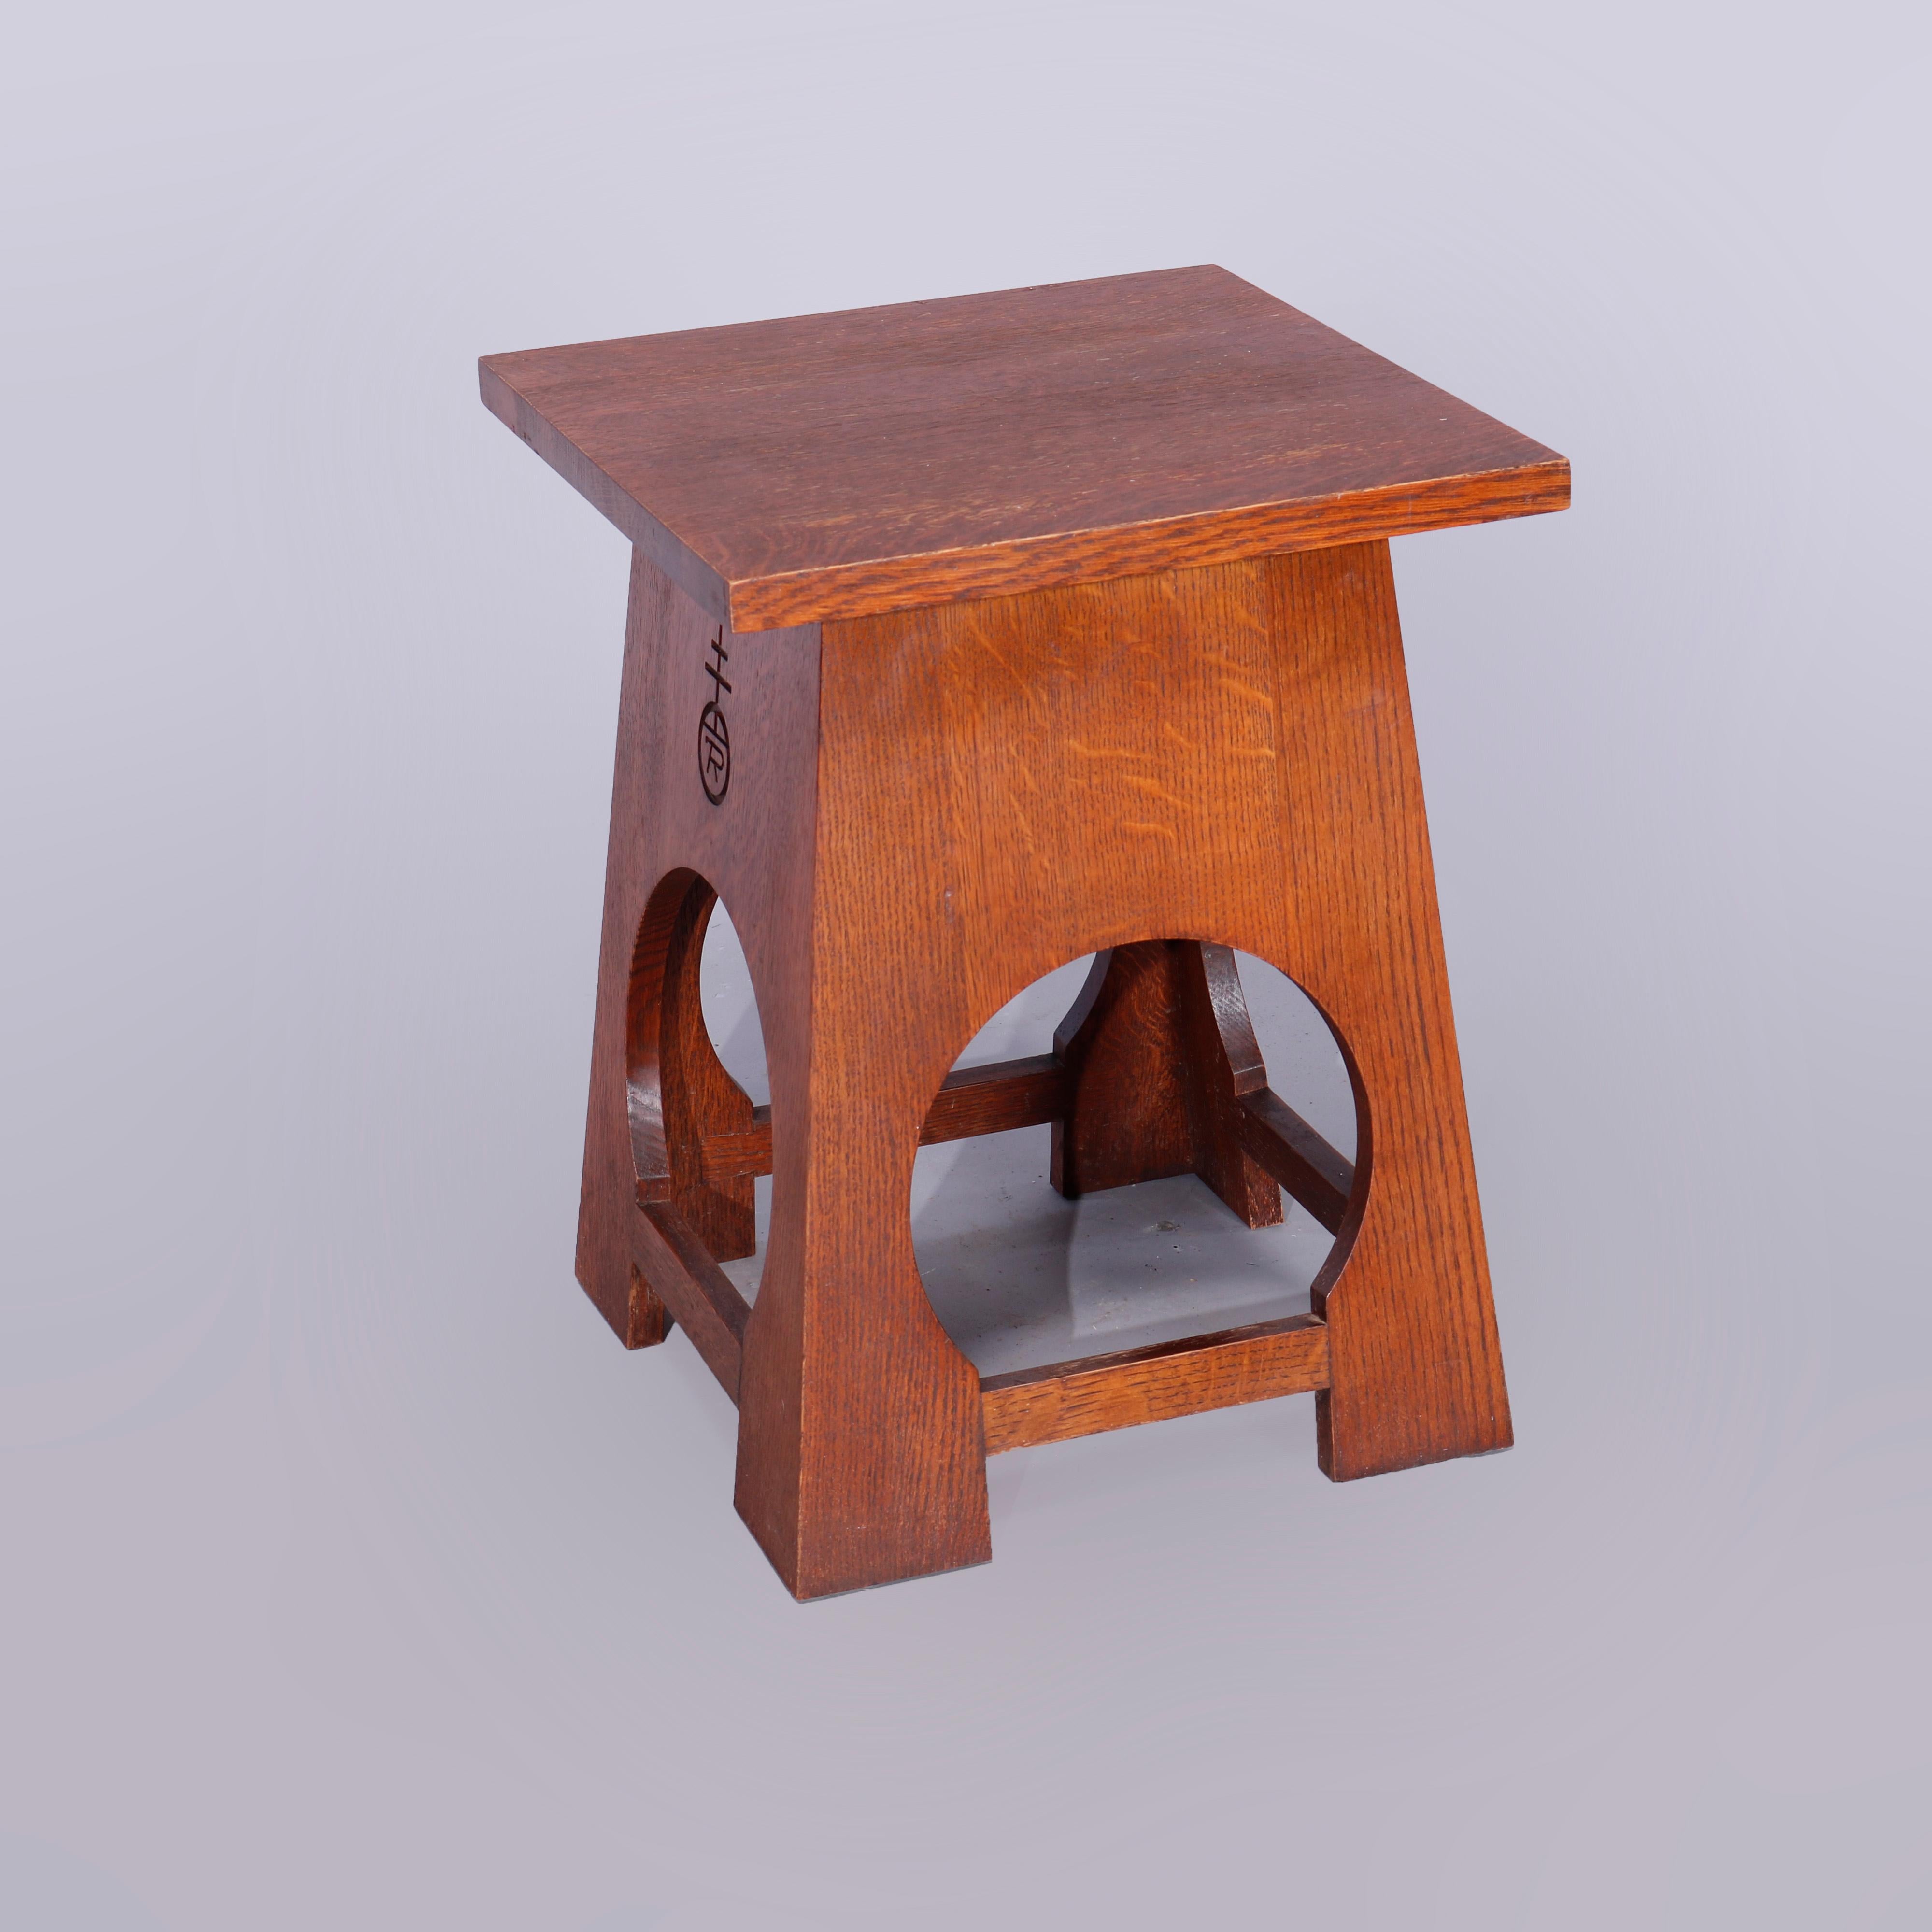 American Pair of Arts & Crafts Mission Oak Tabouret Stands, Roycroft by Stickley, 20th C